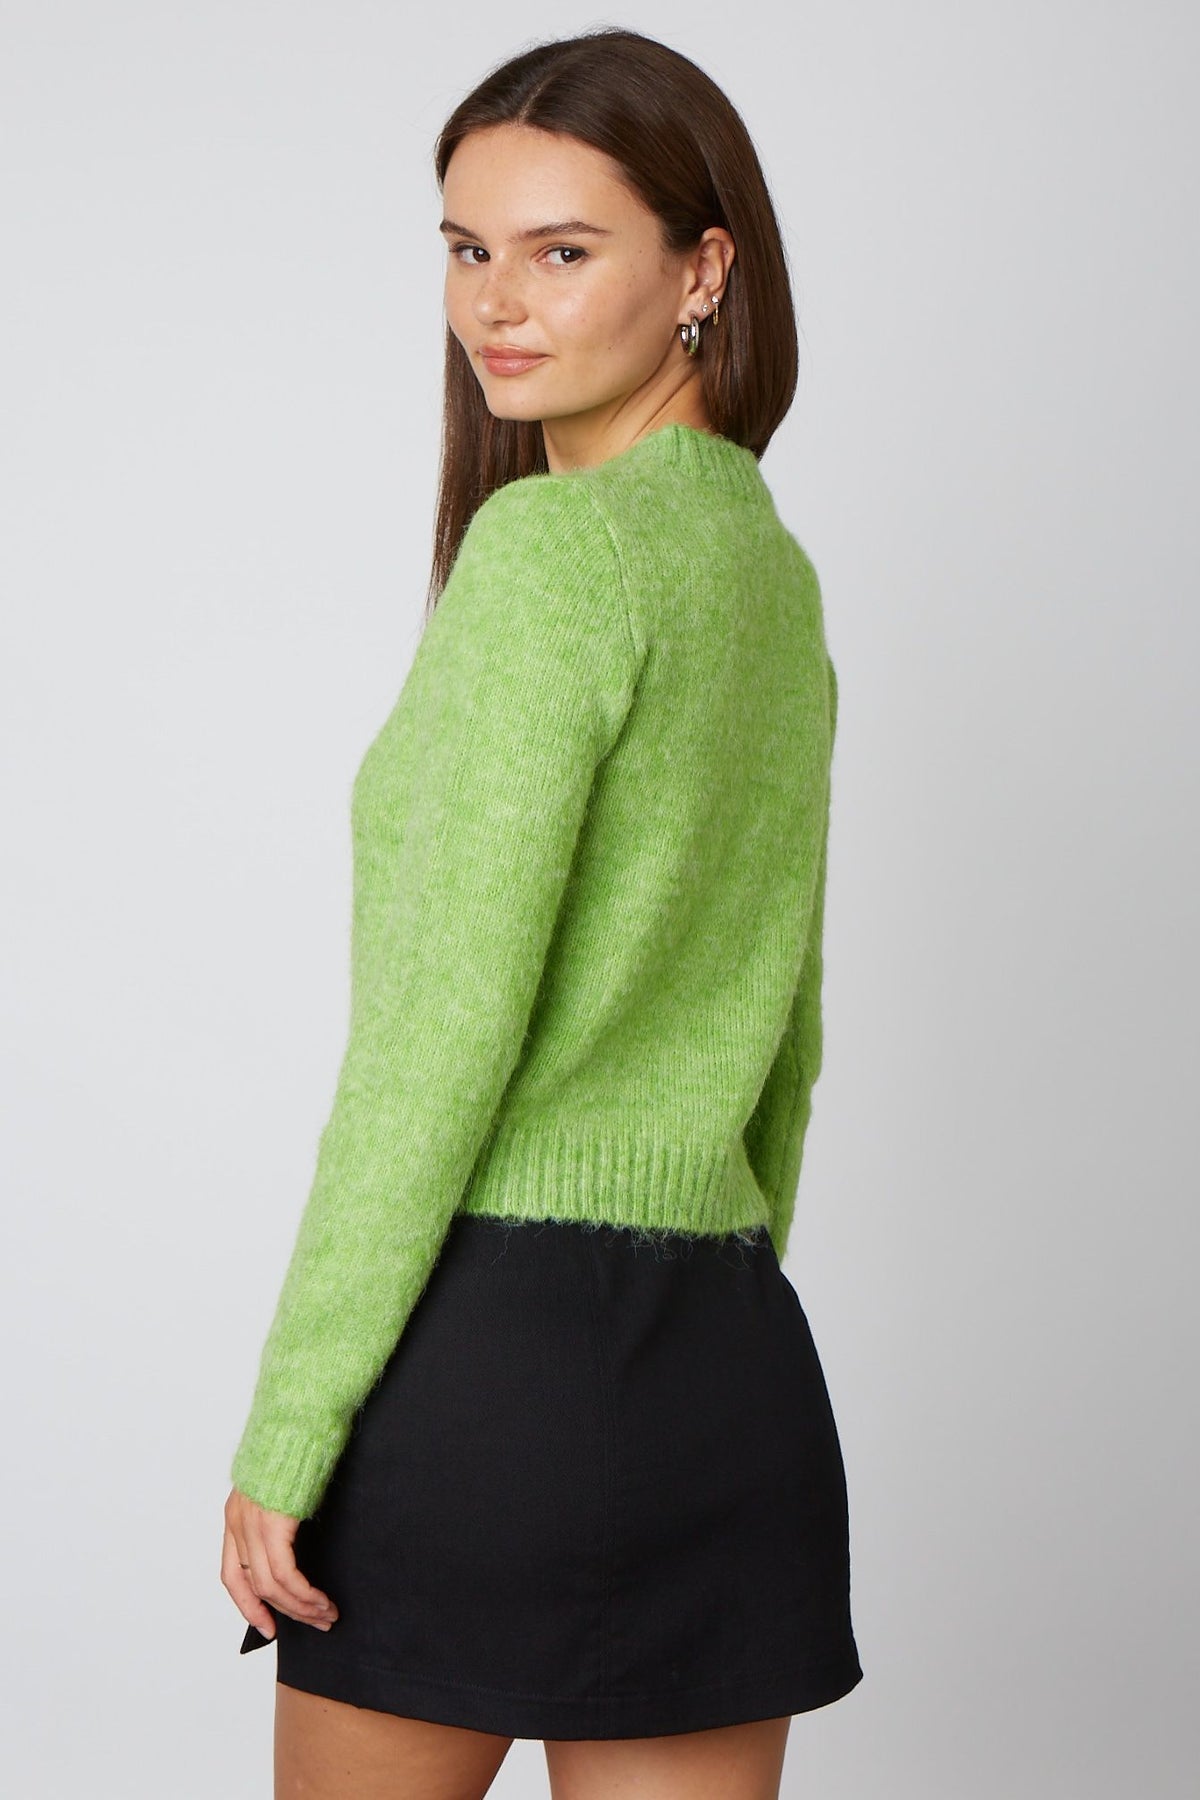 Candy Apple Green Crew Neck Fuzzy Sweater